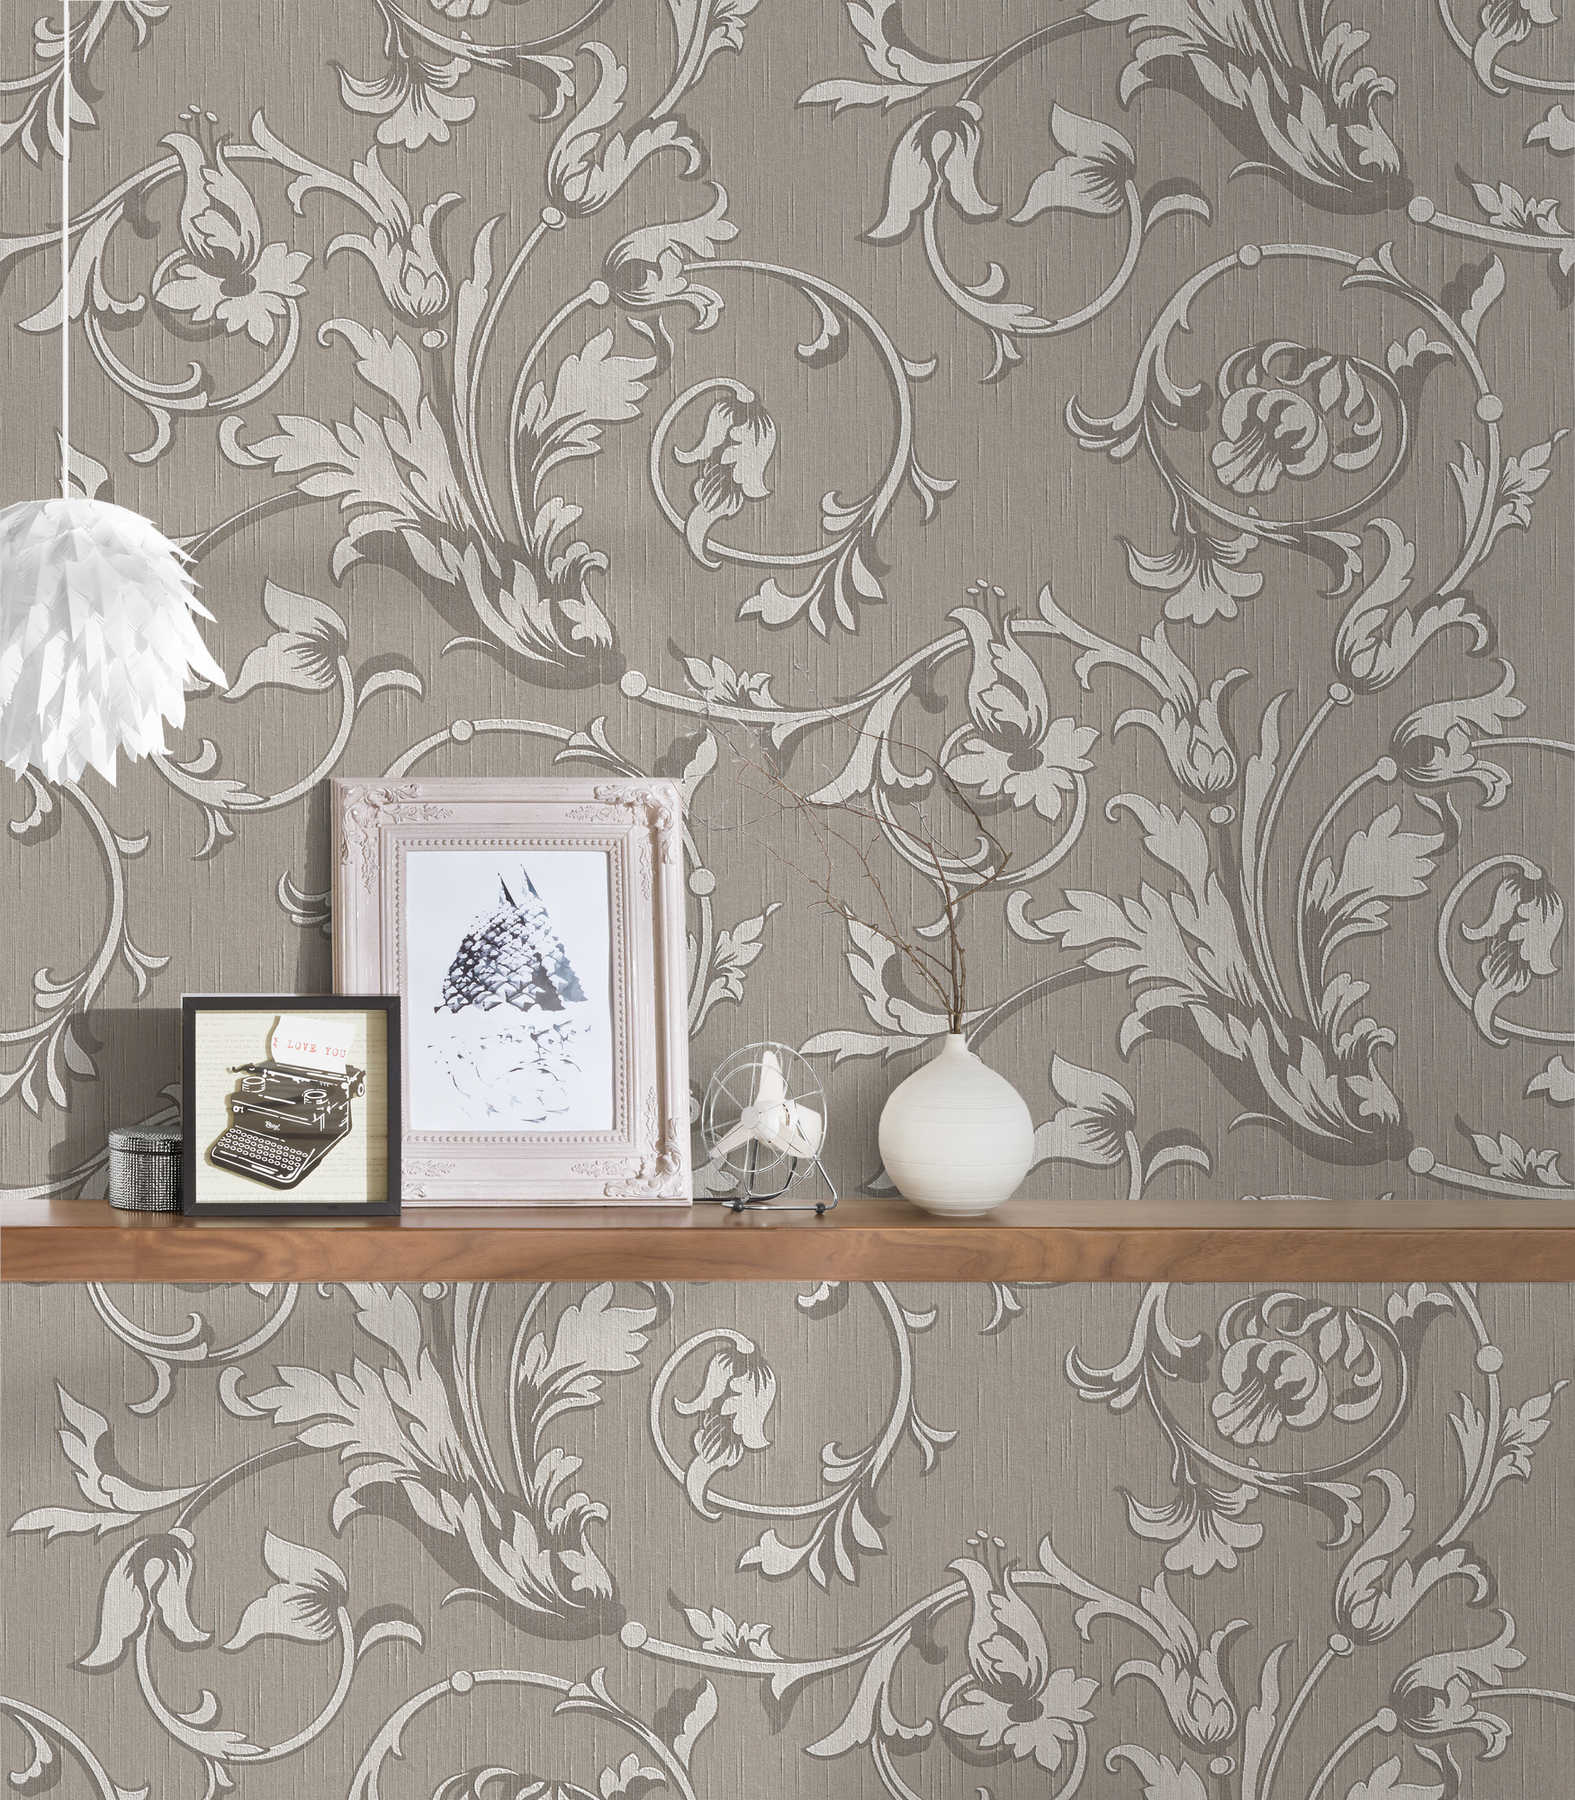             Colonioal style wallpaper with floral ornaments - brown, grey
        